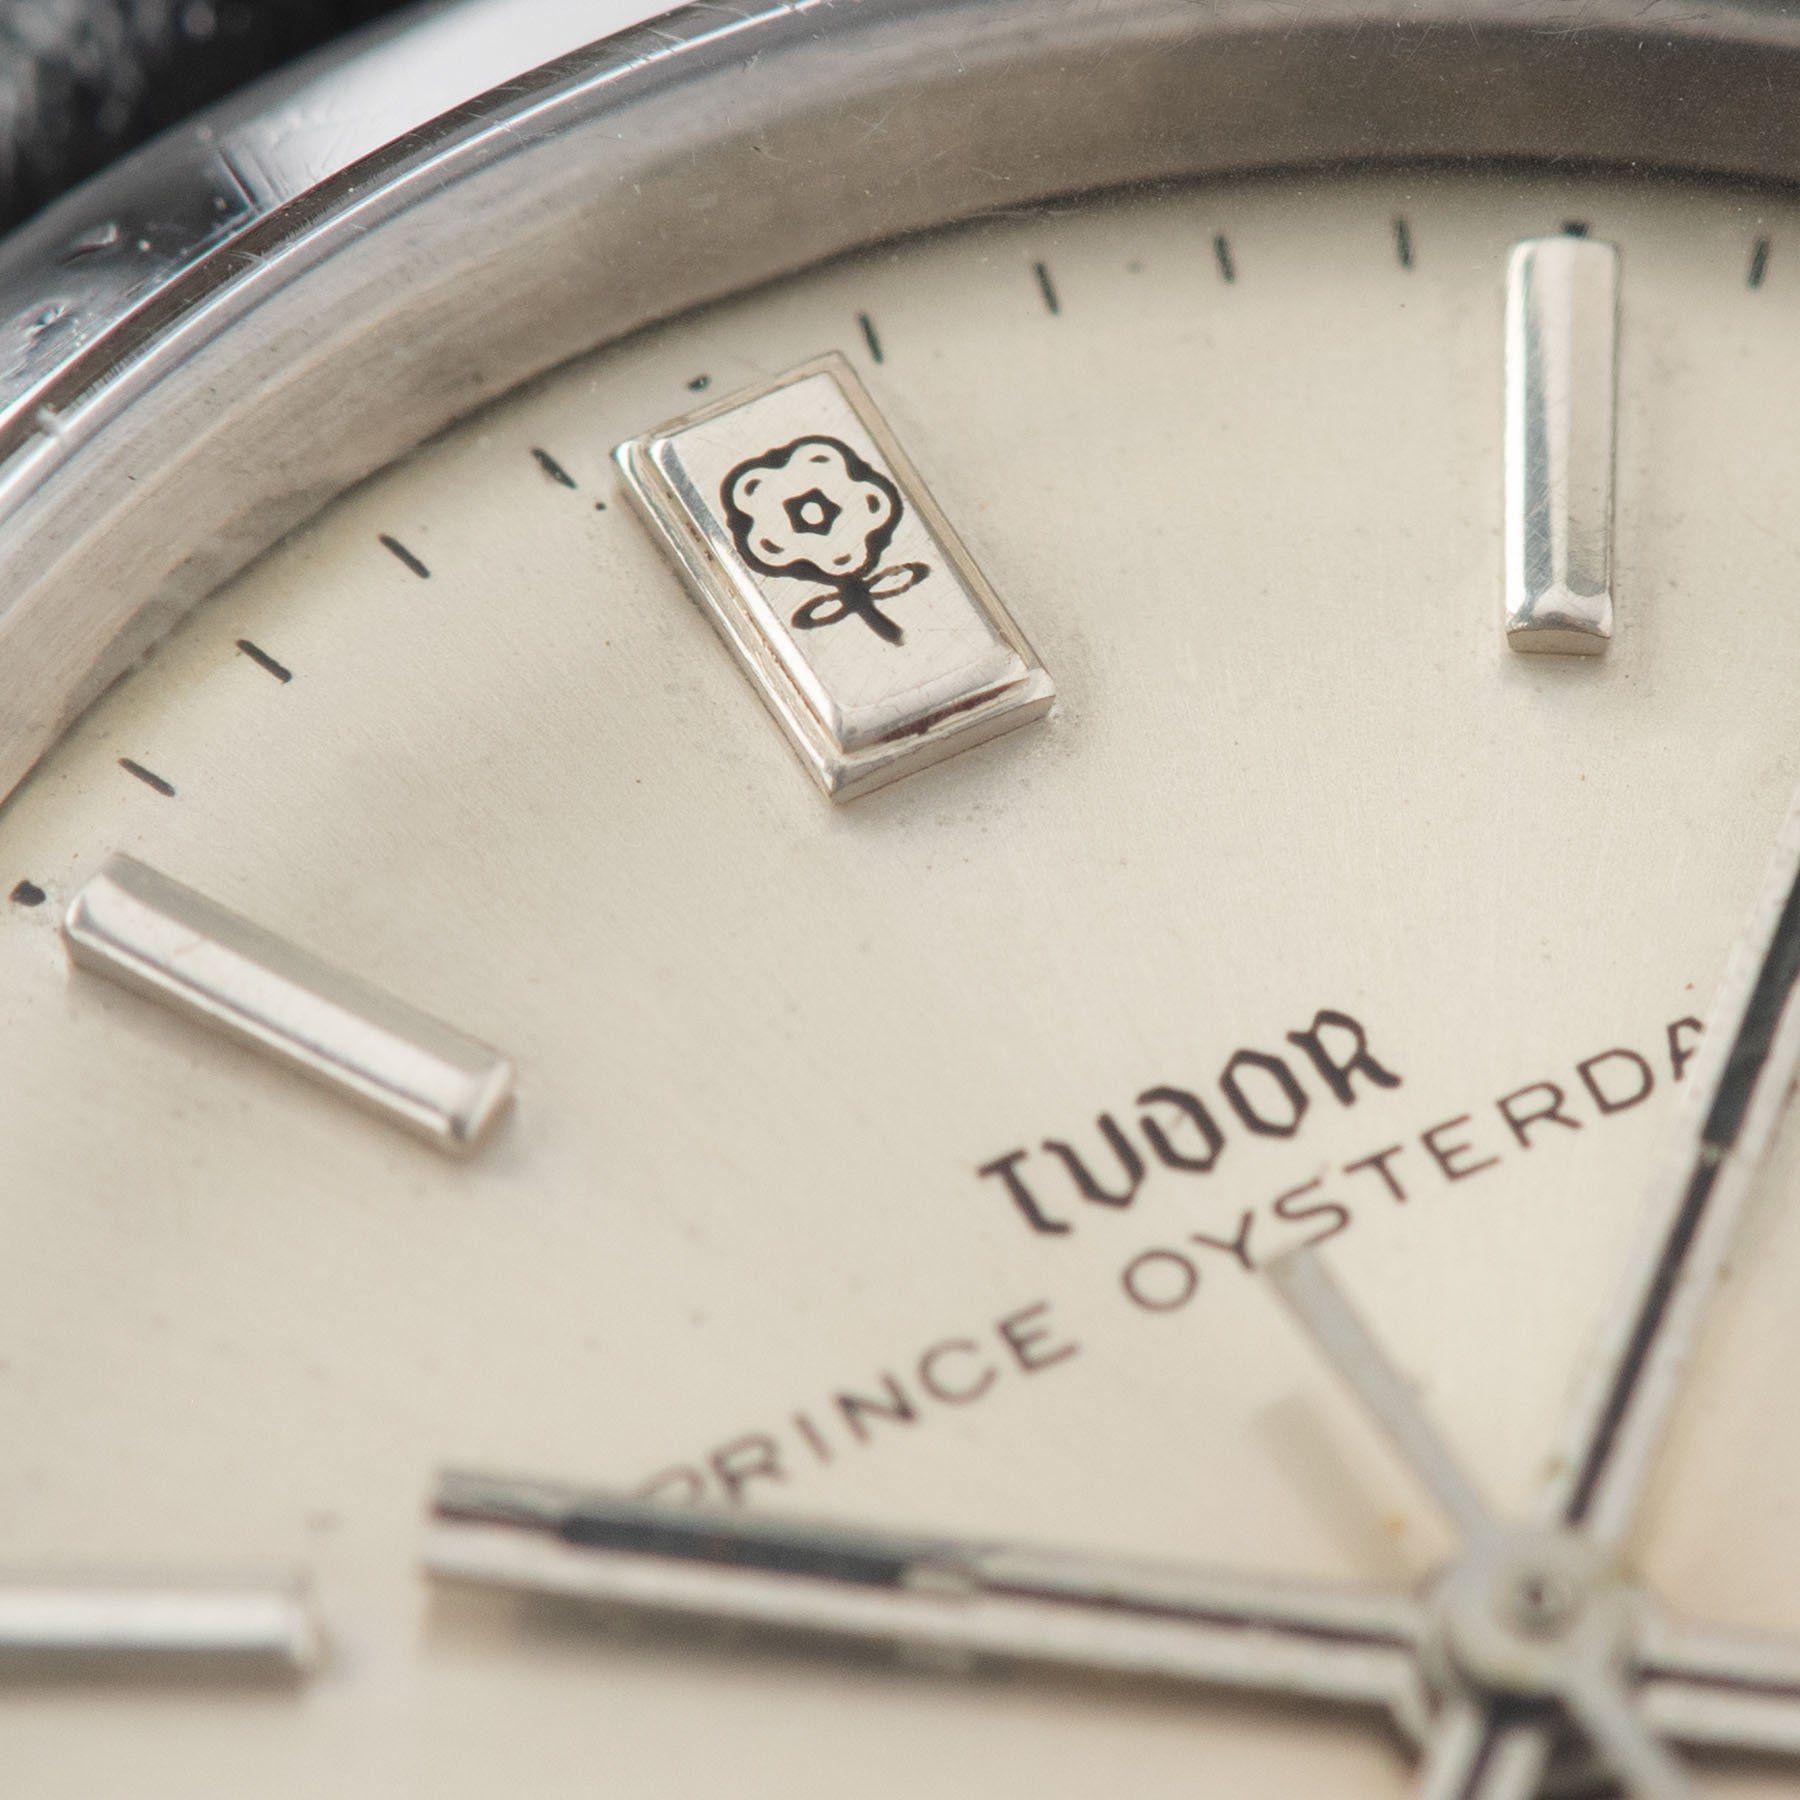 Tudor Prince Oysterdate Silver Dial Reference 7996